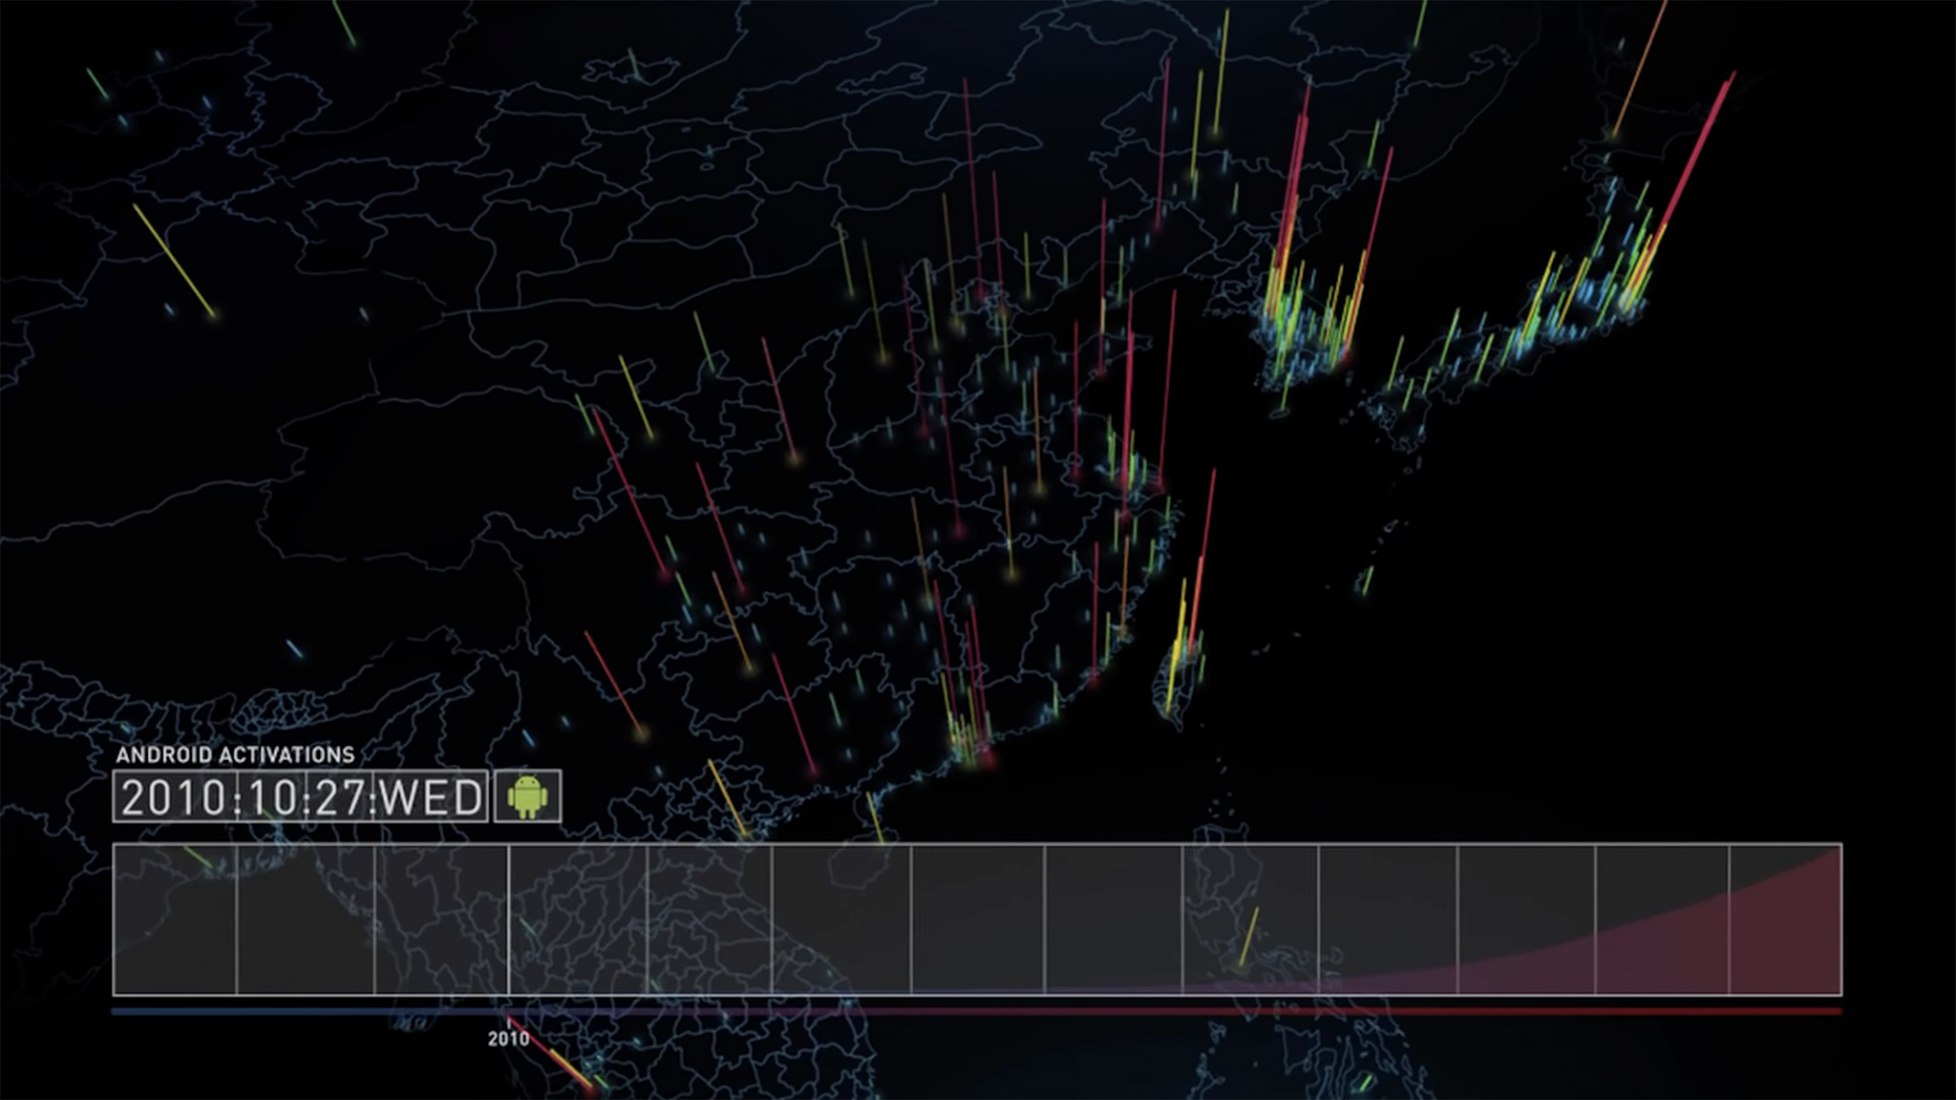 Video screenshot. Global Android Activations, Oct '08 - Jan '11